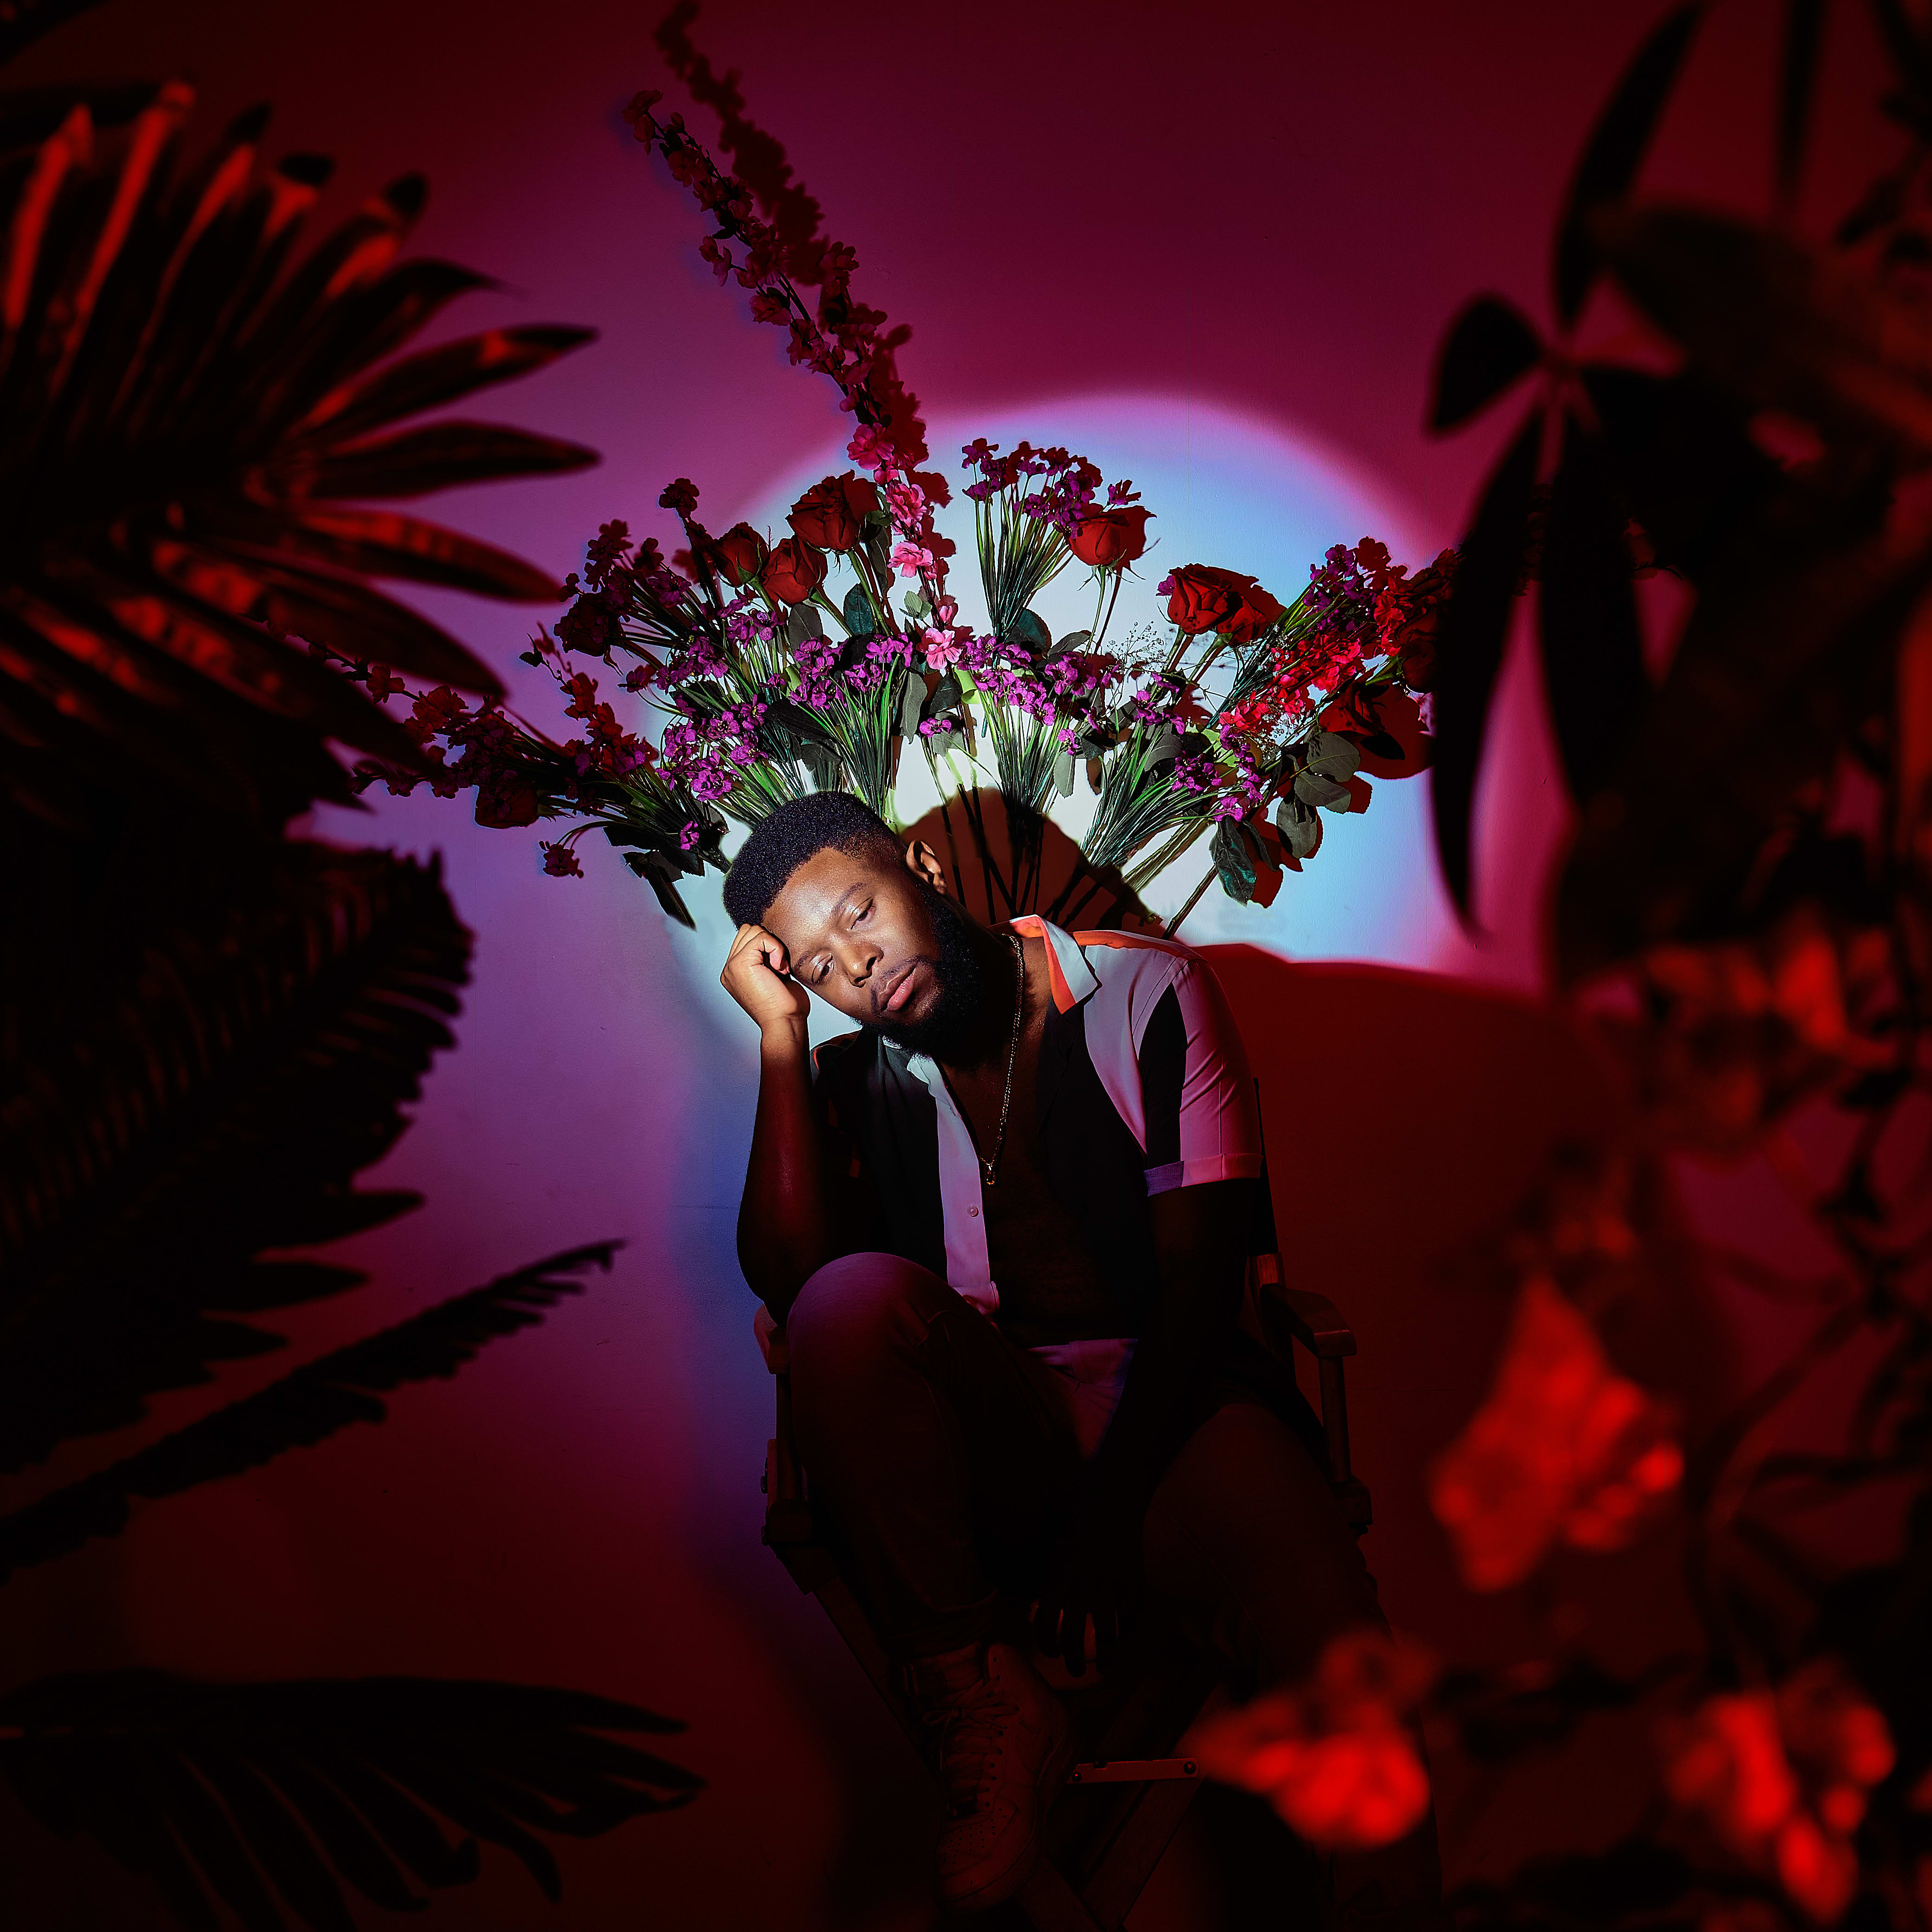 Lexxicon on the cover of his album with flowers